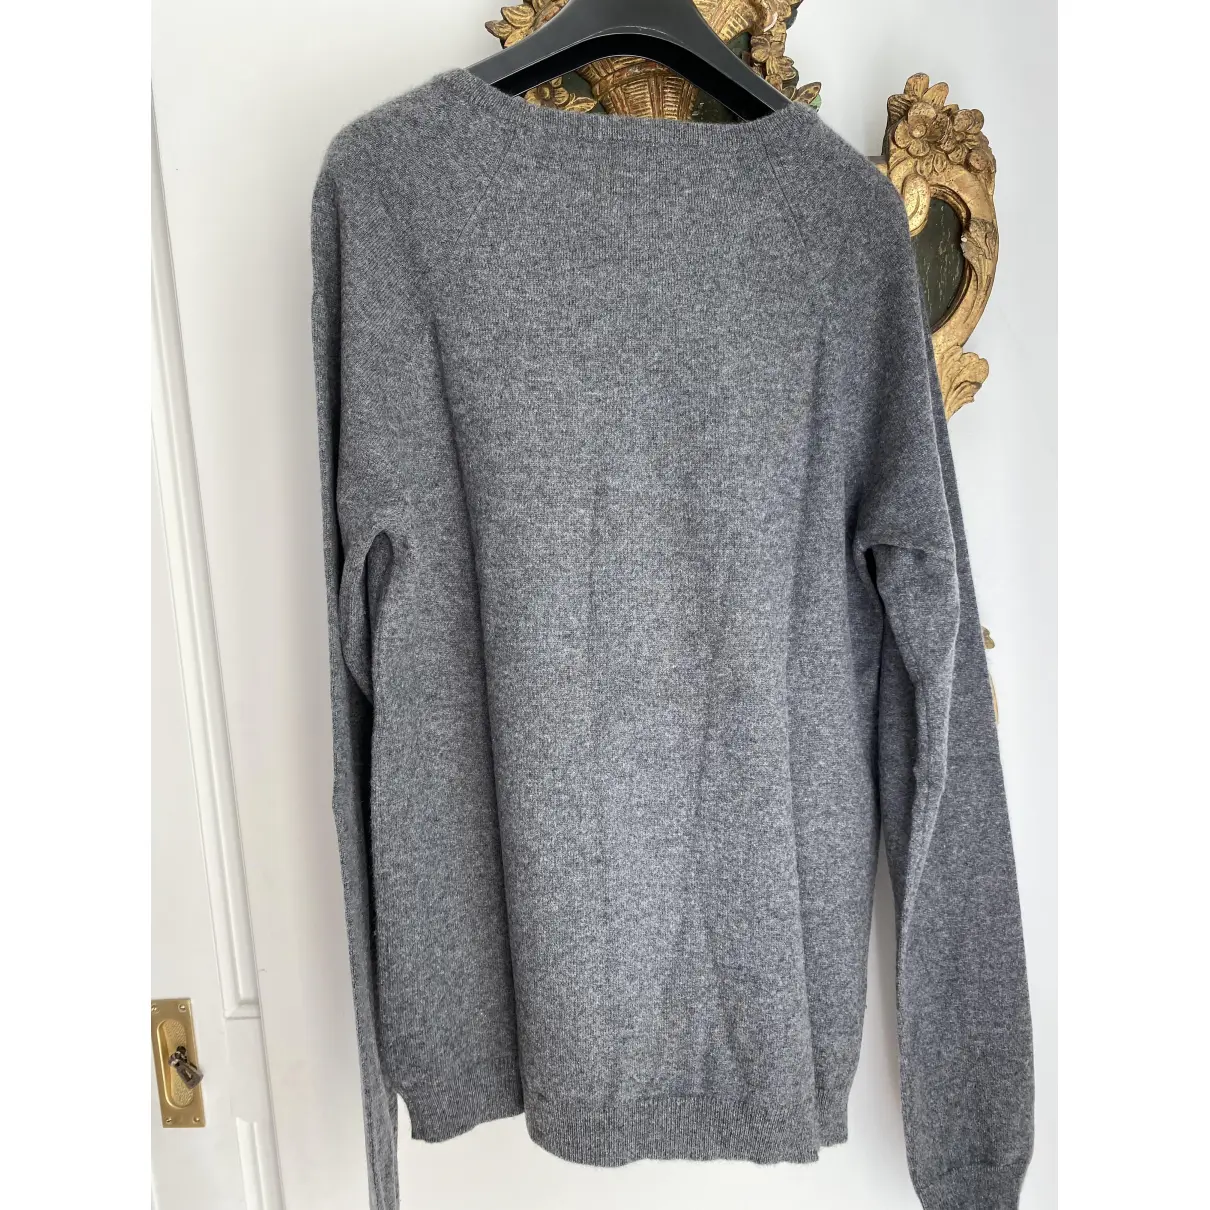 Buy Eric Bompard Cashmere pull online